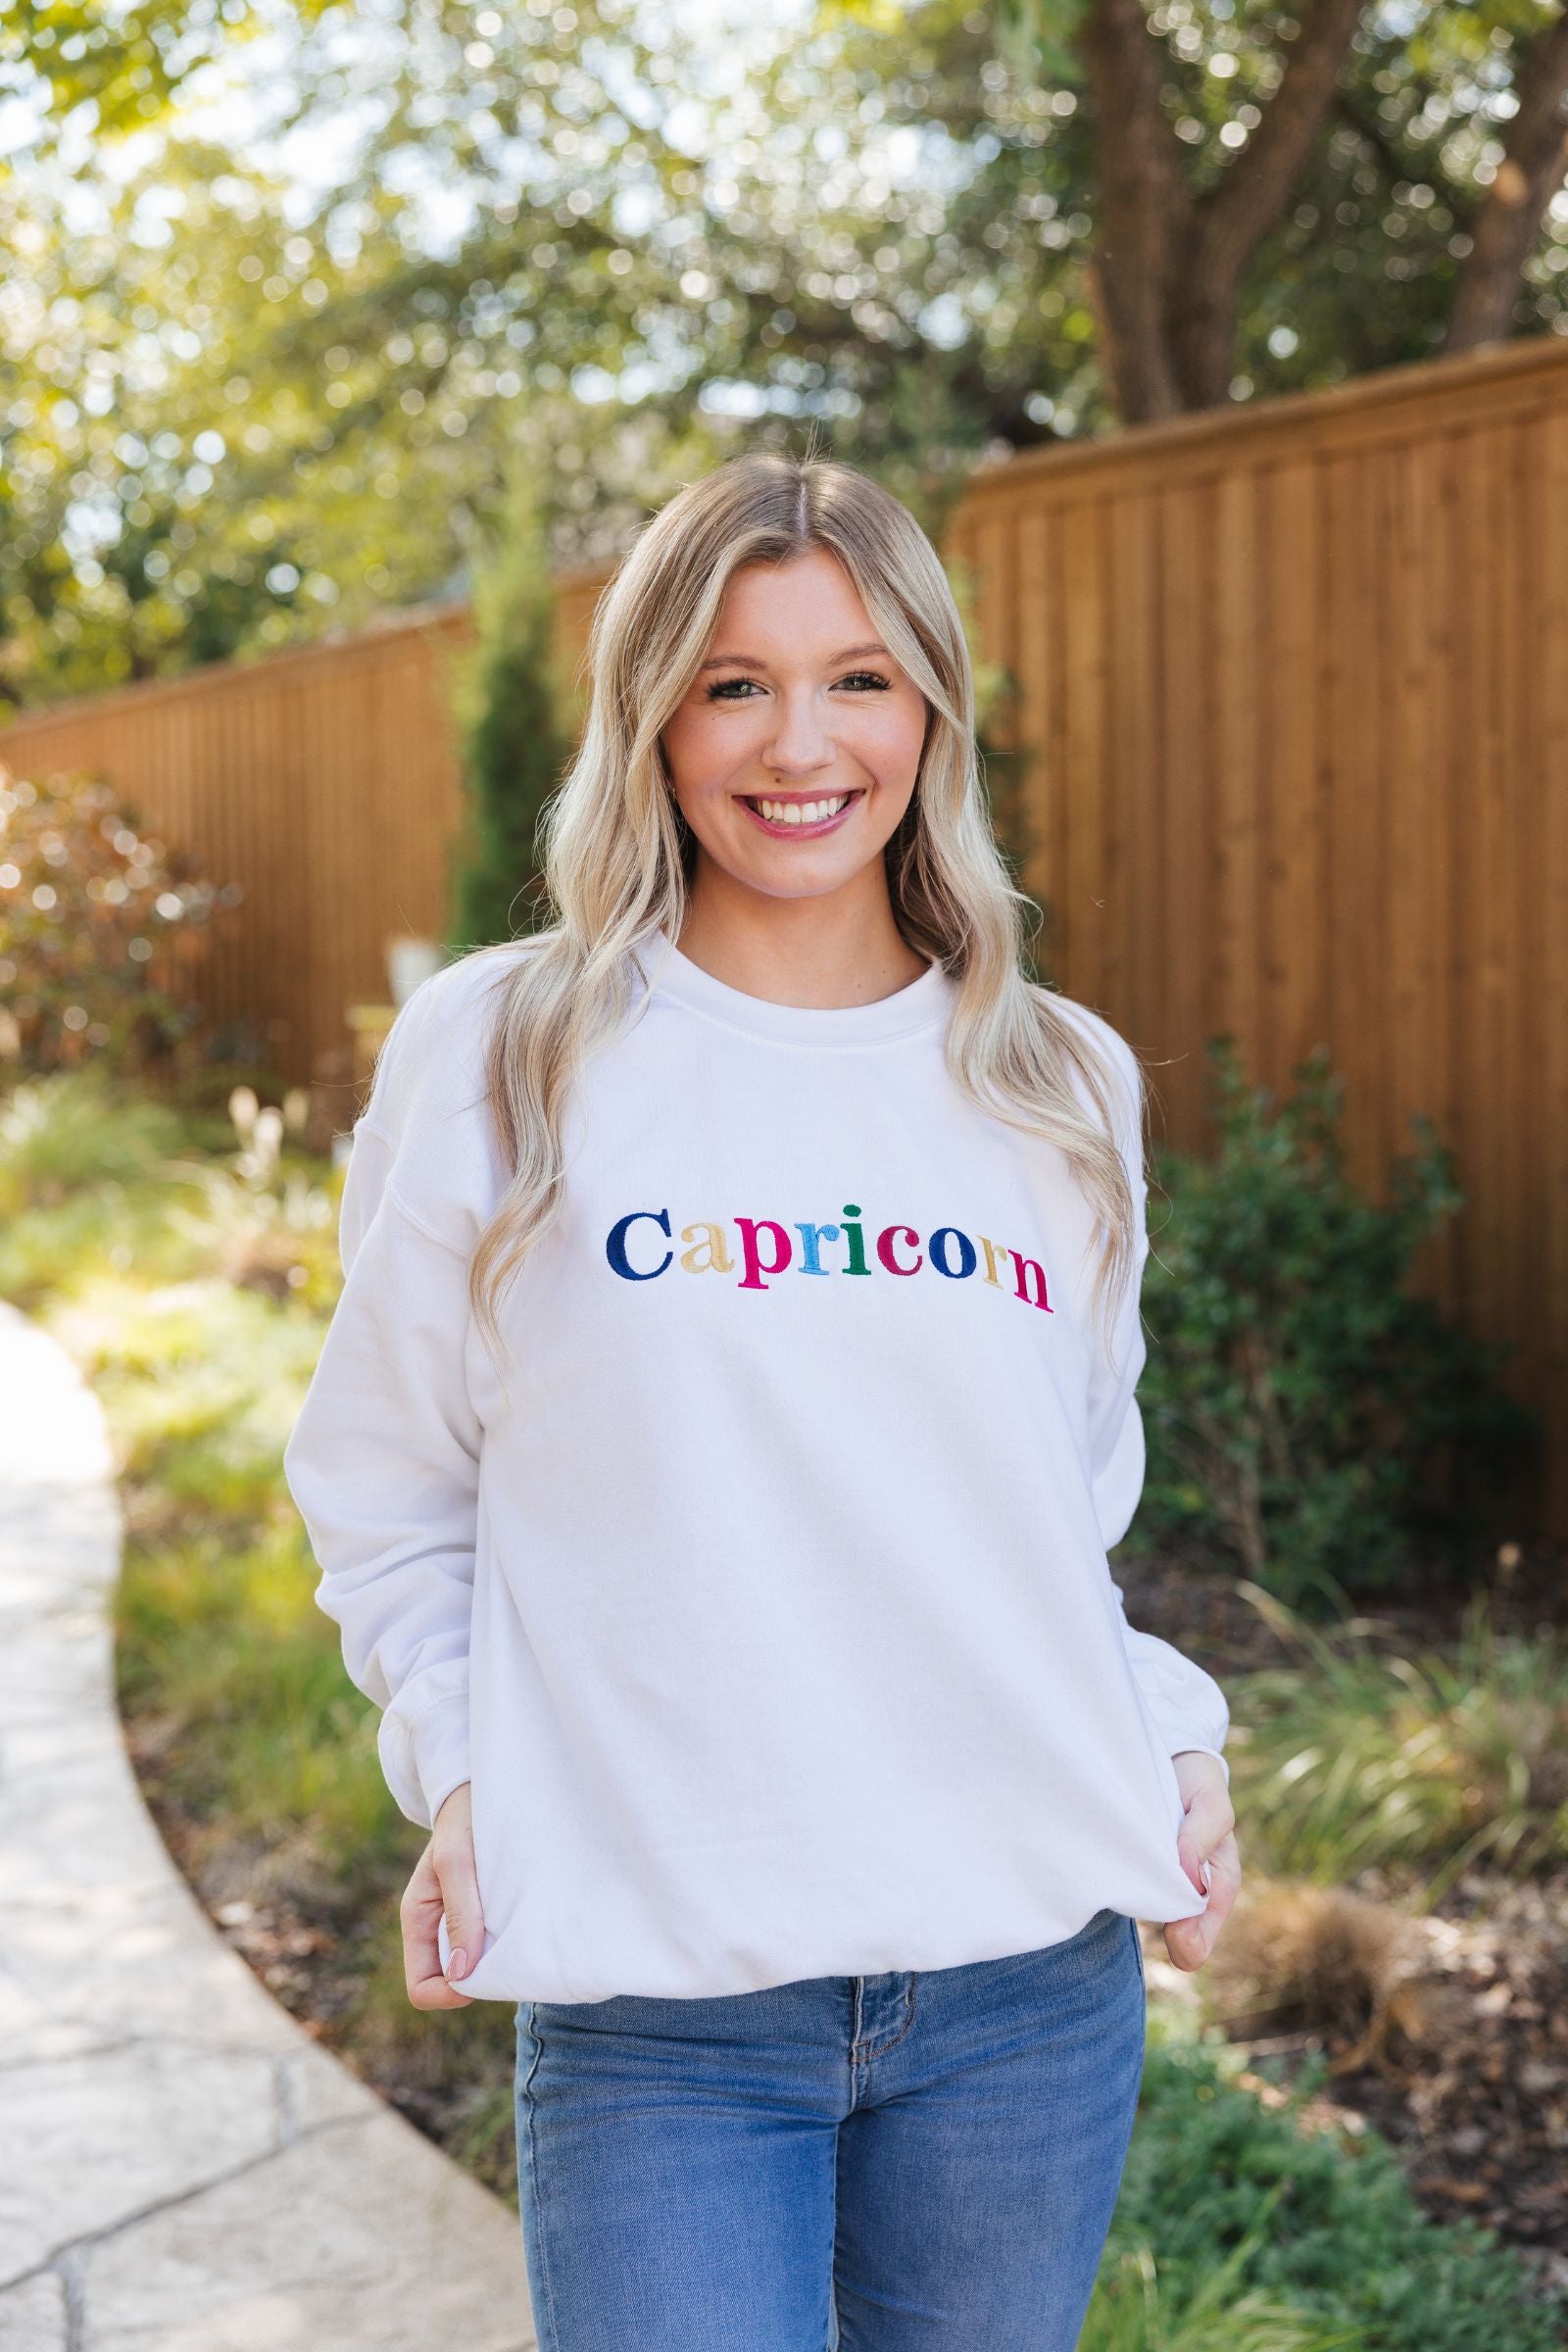 A white sweatshirt with embroidered multi-colored letters 